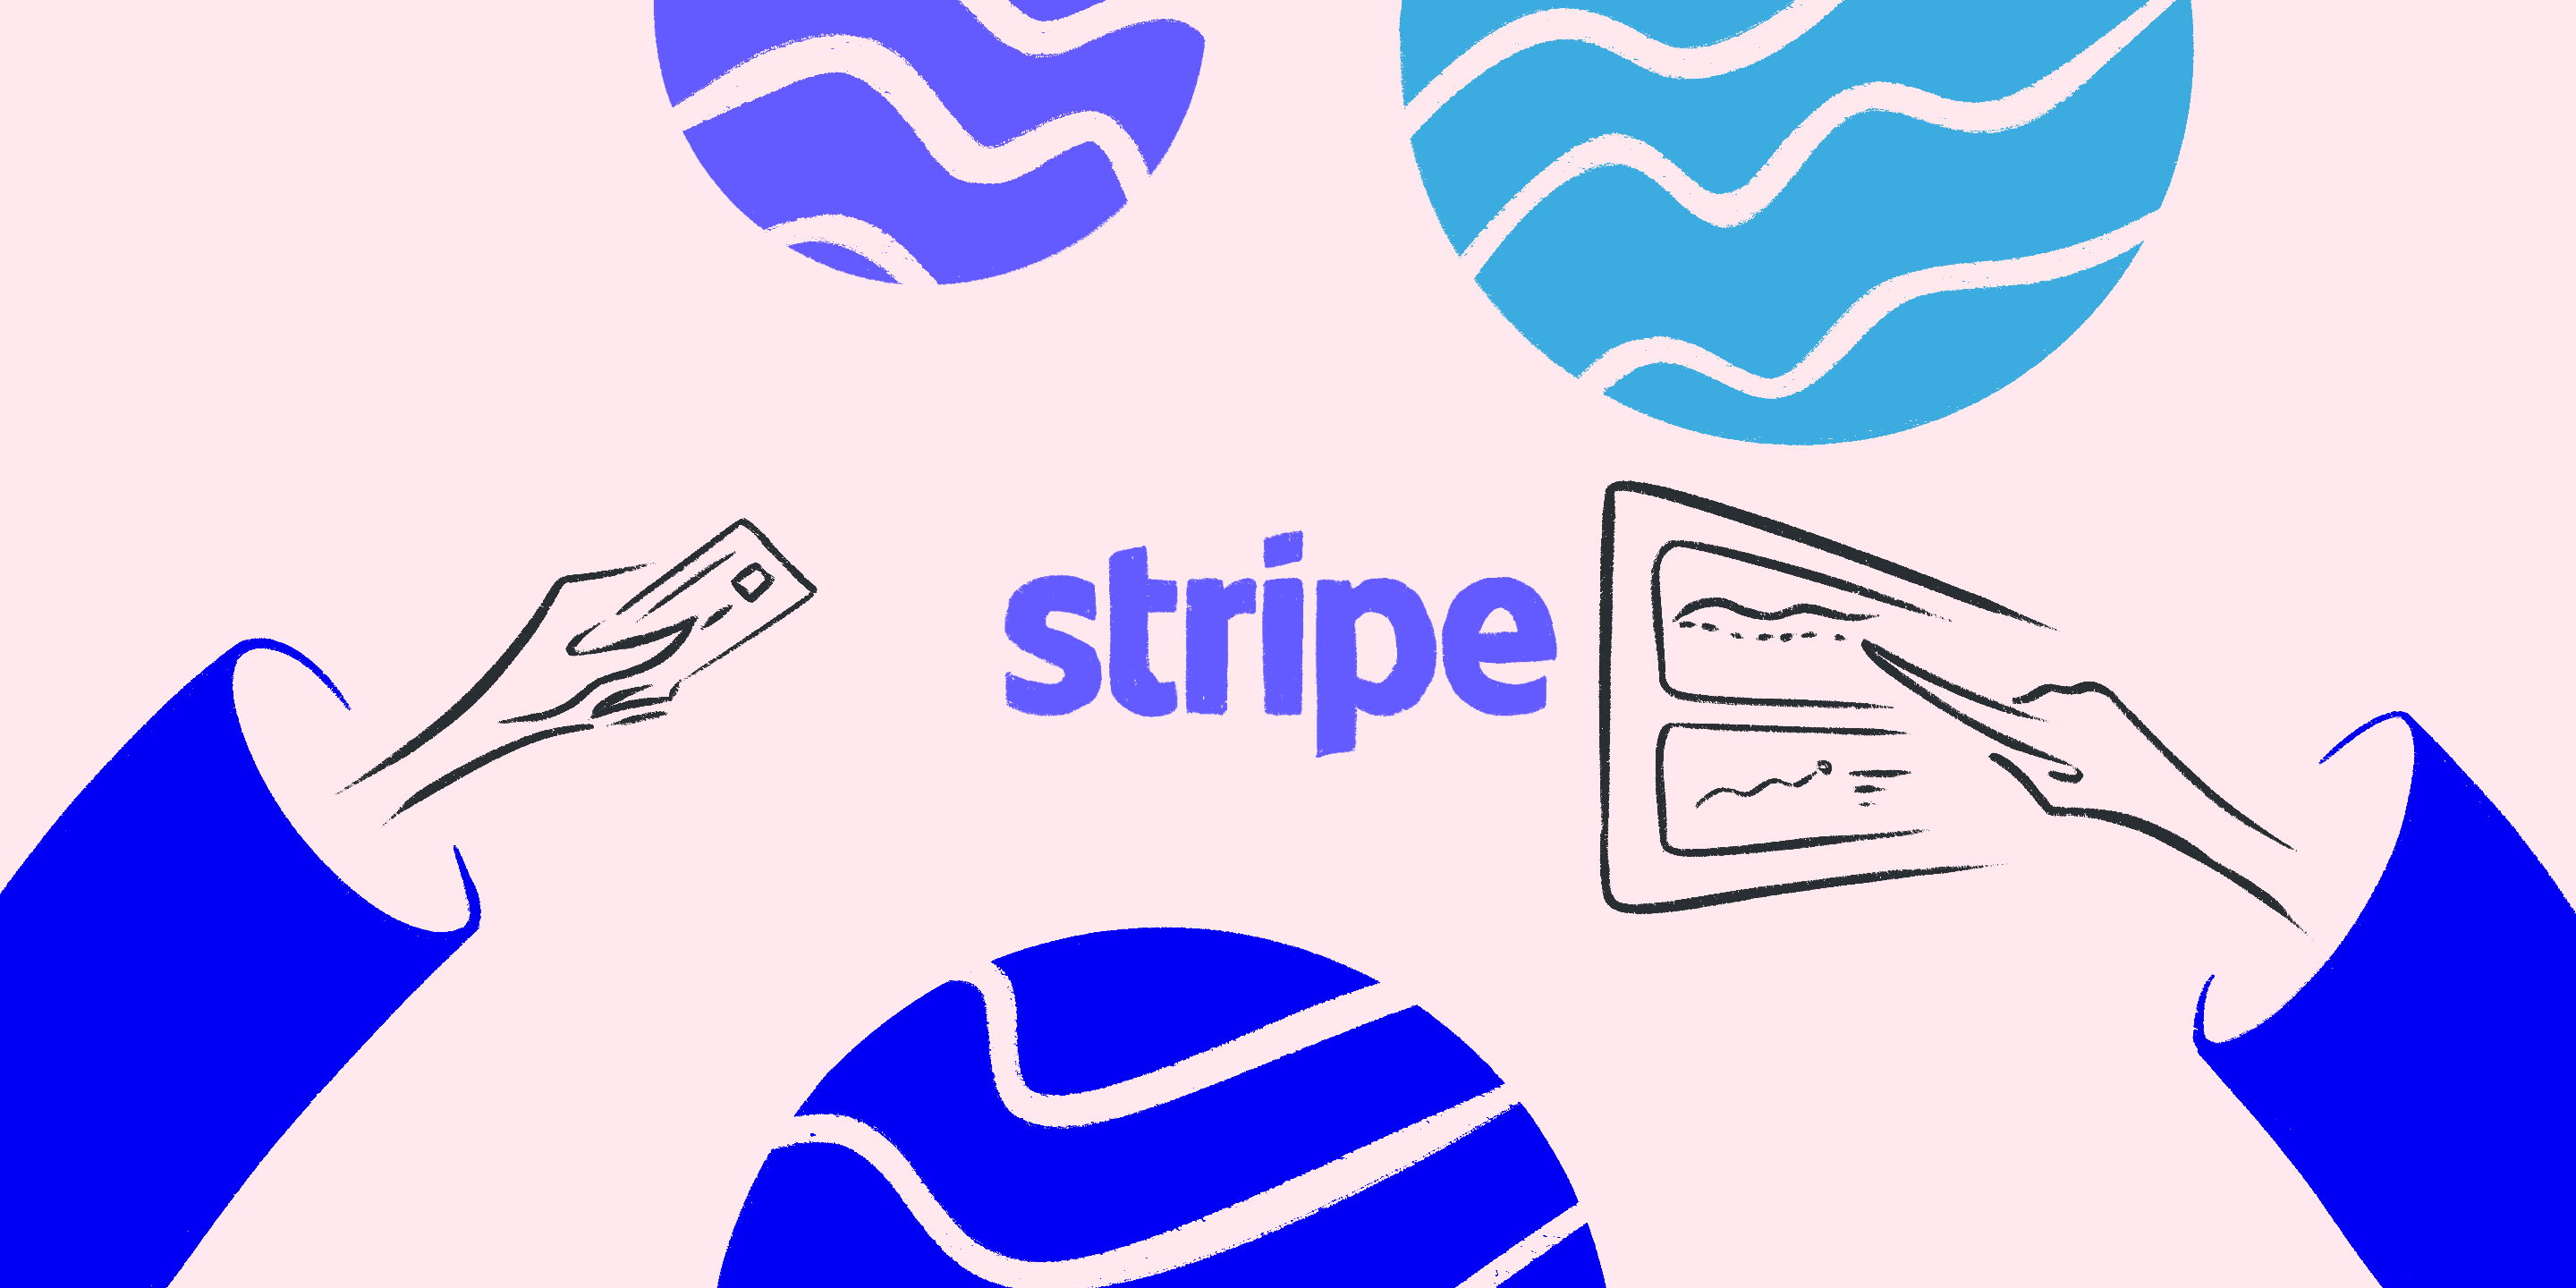 Stripe is the example of B2B e commerce business model, which provides payment infrastructure for businesses. 